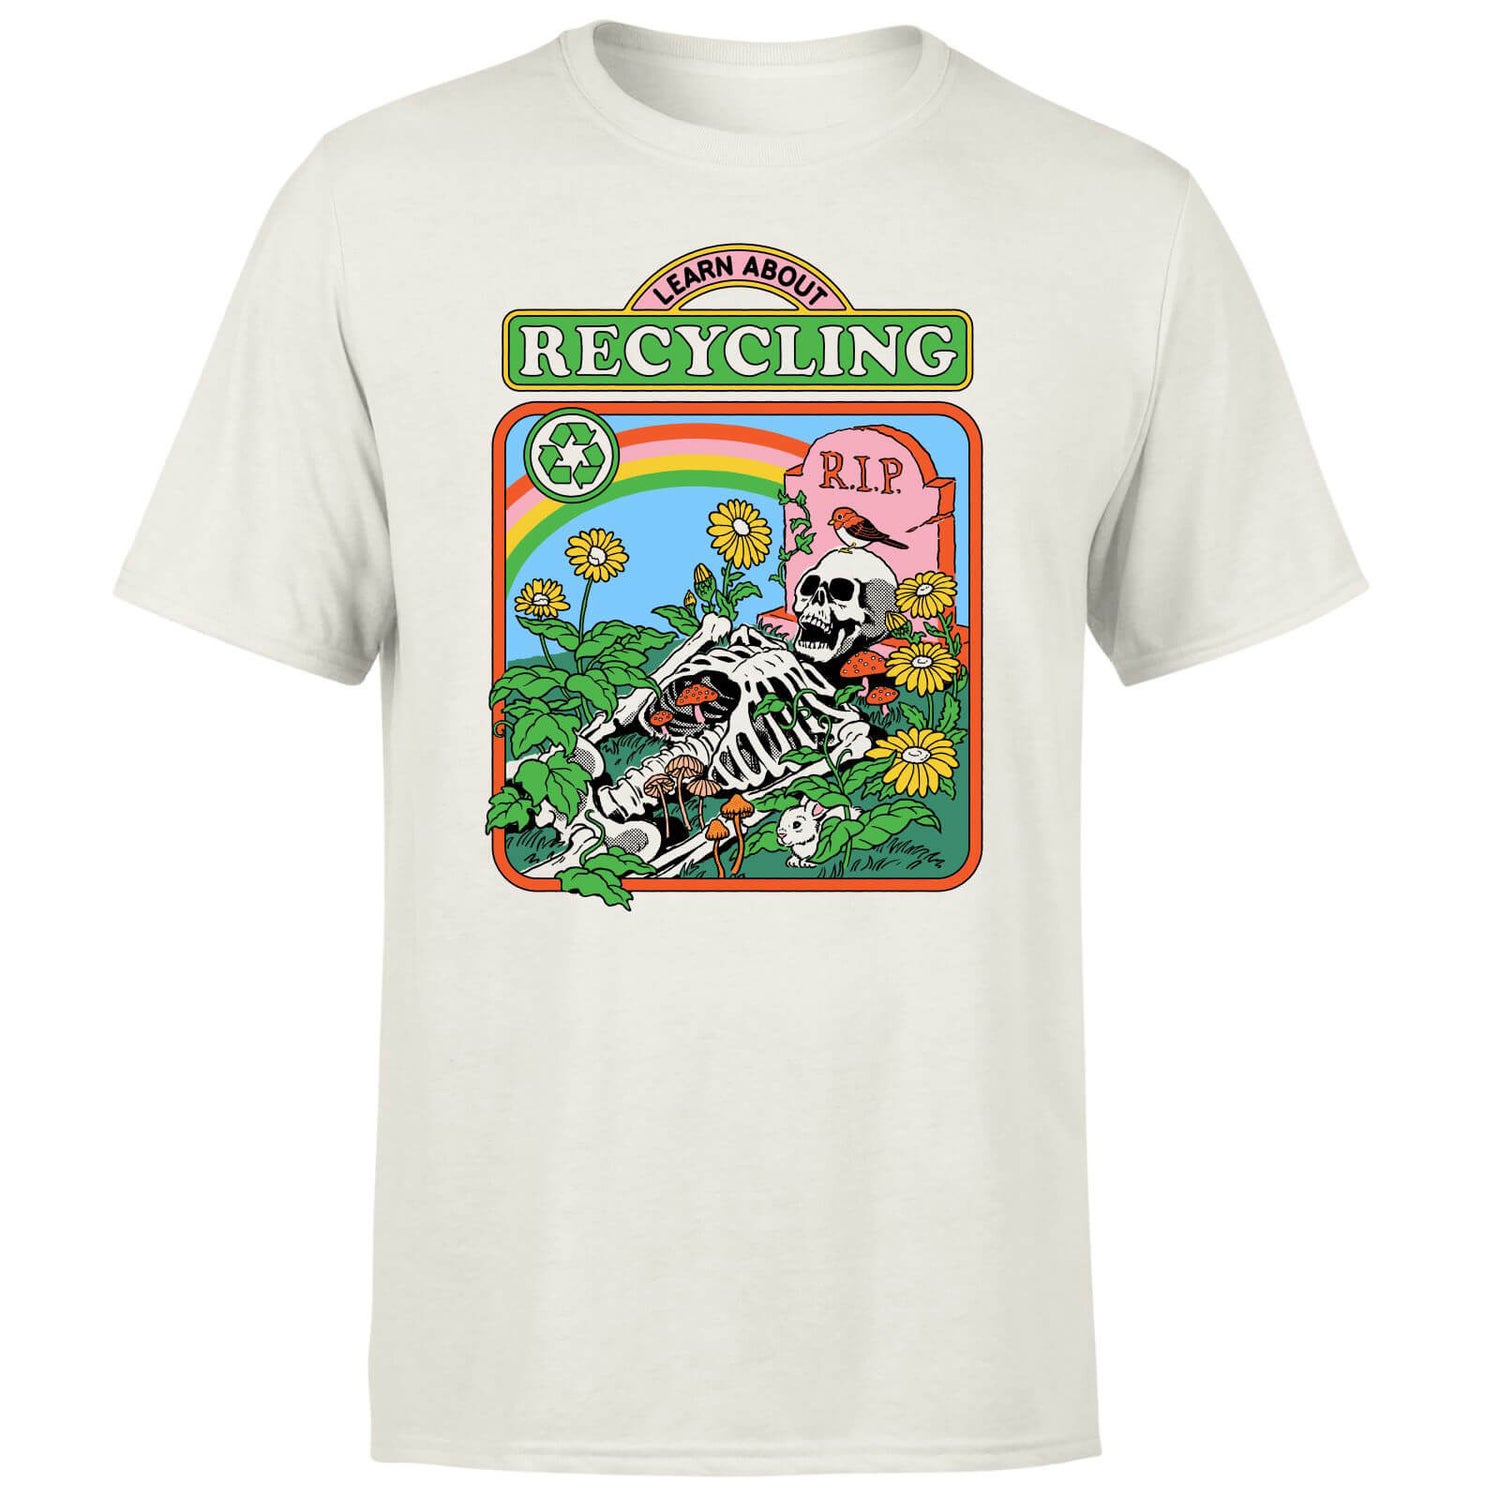 Learn About Recycling Men's T-Shirt - White Vintage Wash